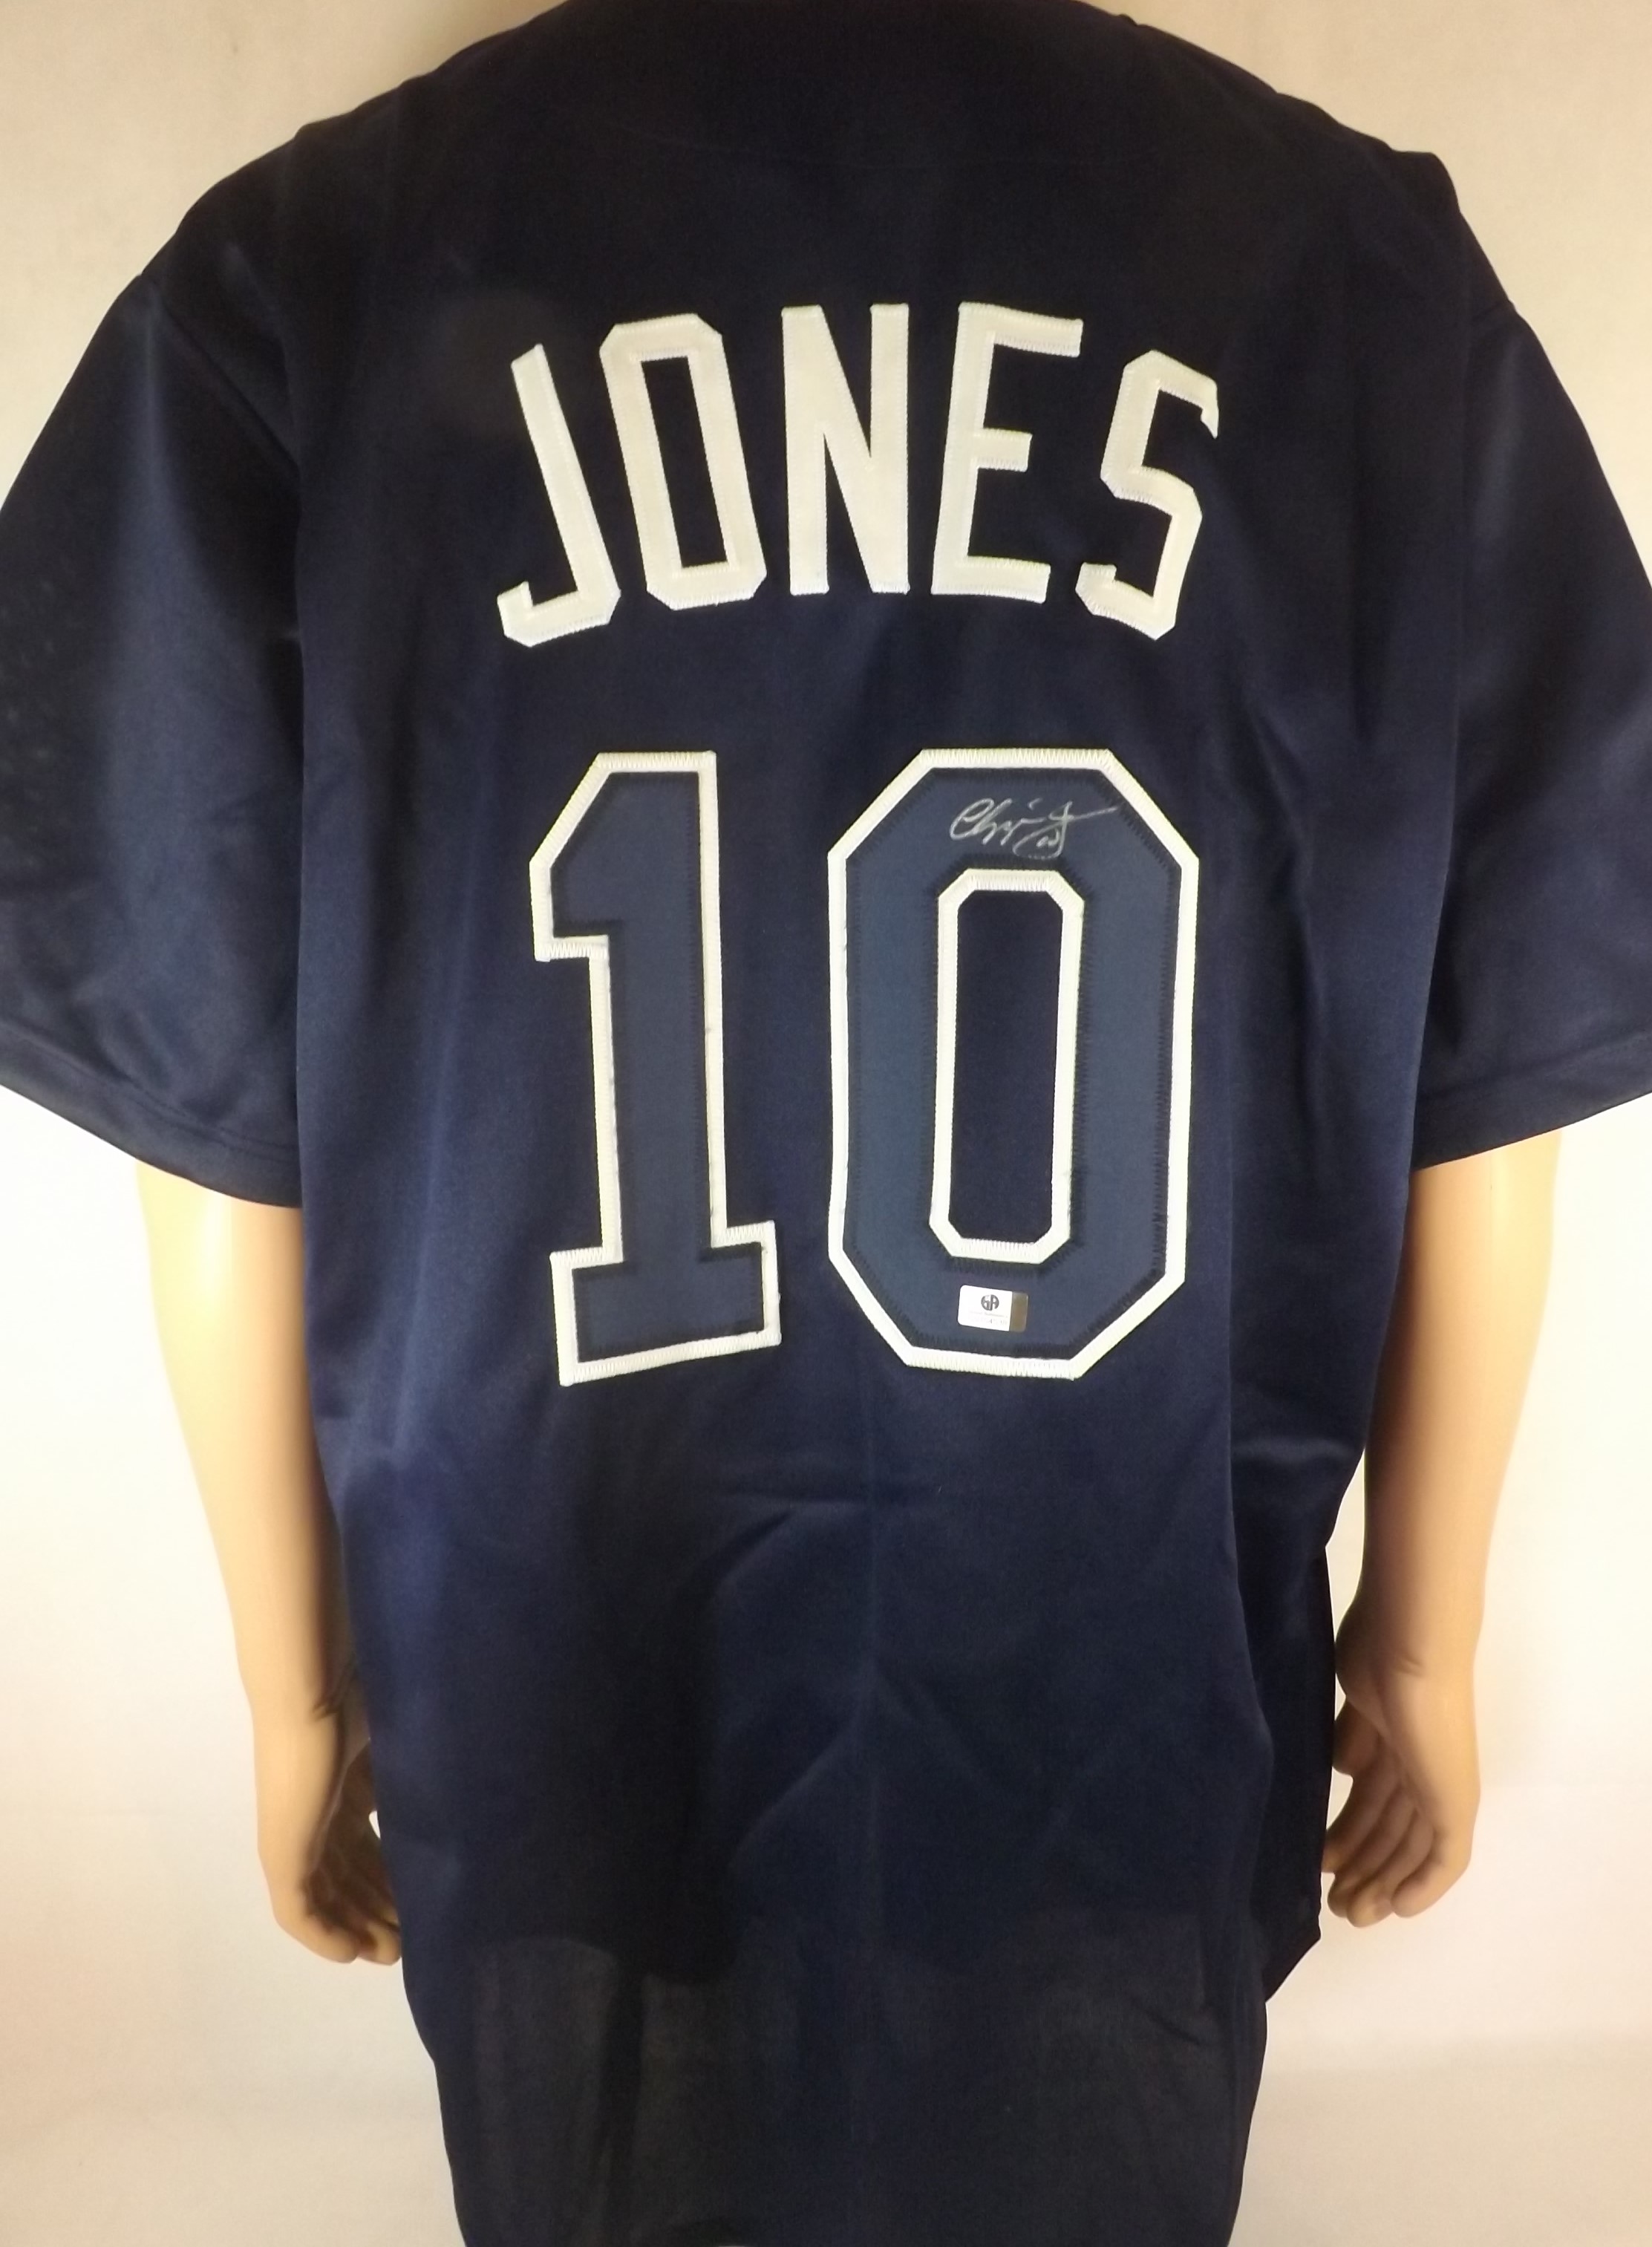 Chipper Jones signed jersey - collectibles - by owner - sale